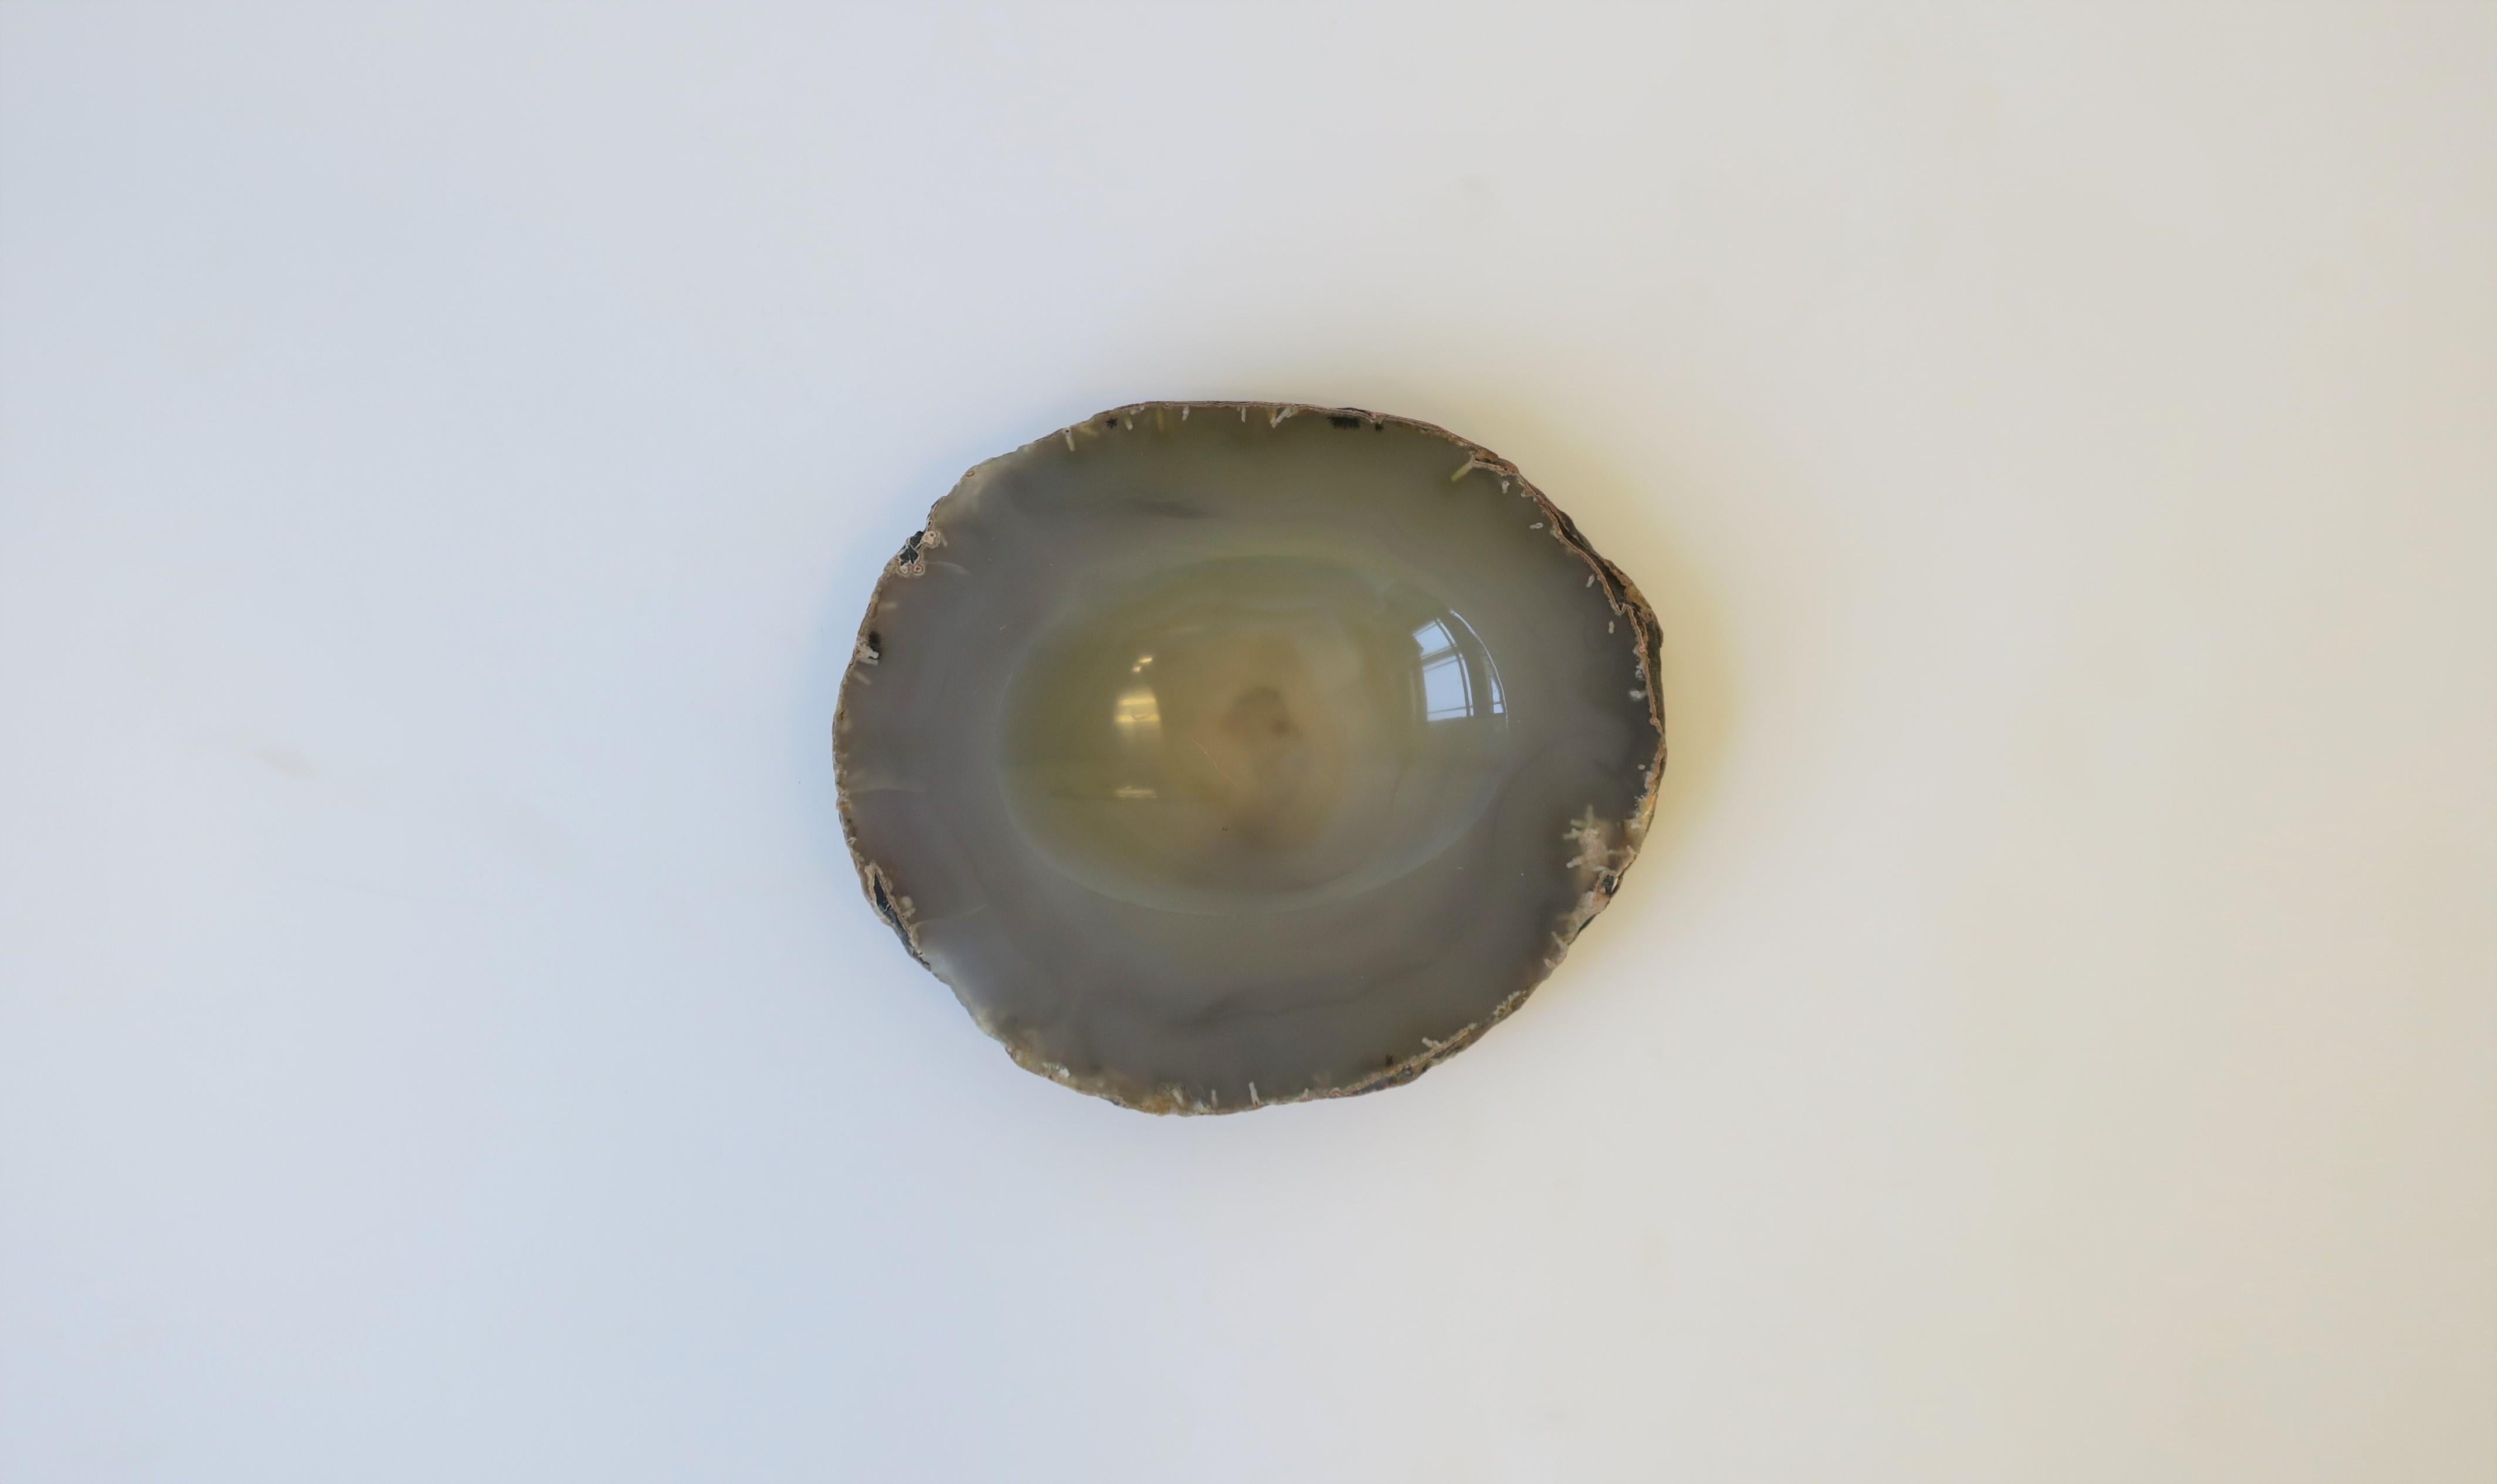 A beautiful vintage grey agate vessel, decorative object, or small bowl. Piece can work as a small jewelry dish, a standalone decorative piece, or paperweight/desk accessory for small items, etc. Elegant and convenient for a table, desk, or shelf.